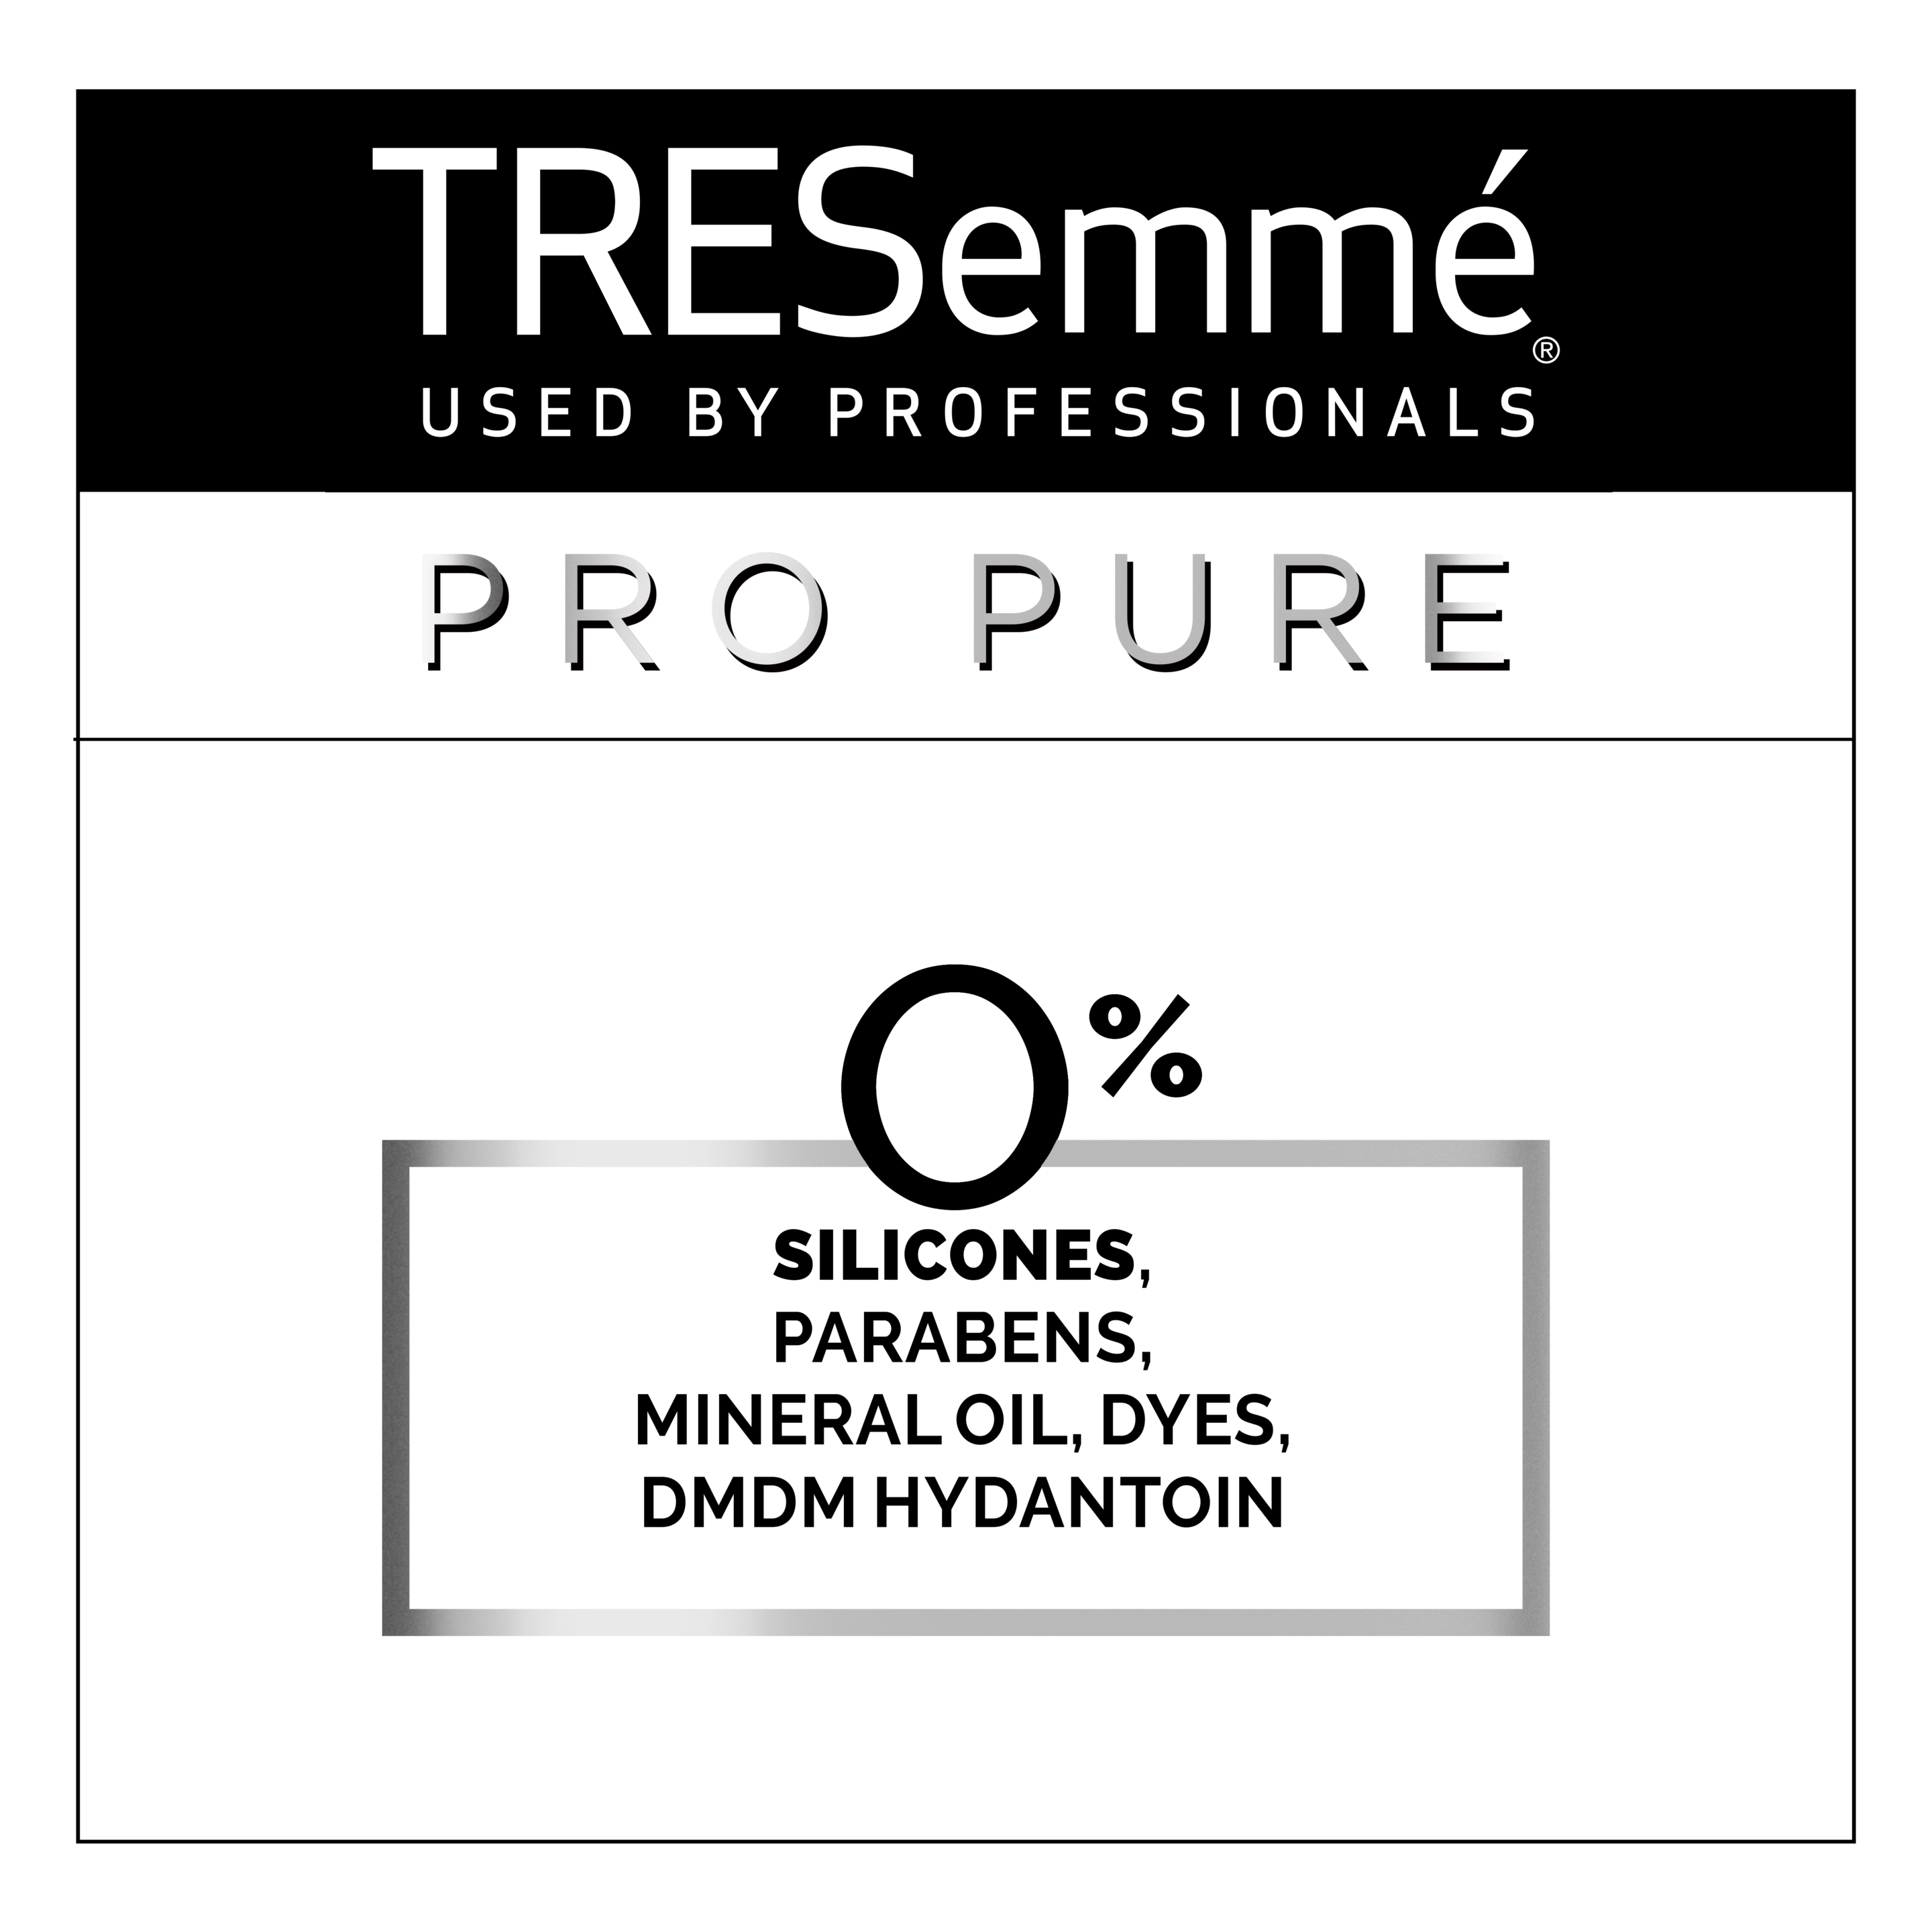 TRESemmé Pro Pure Micellar Moisture Conditioner for Dry Hair